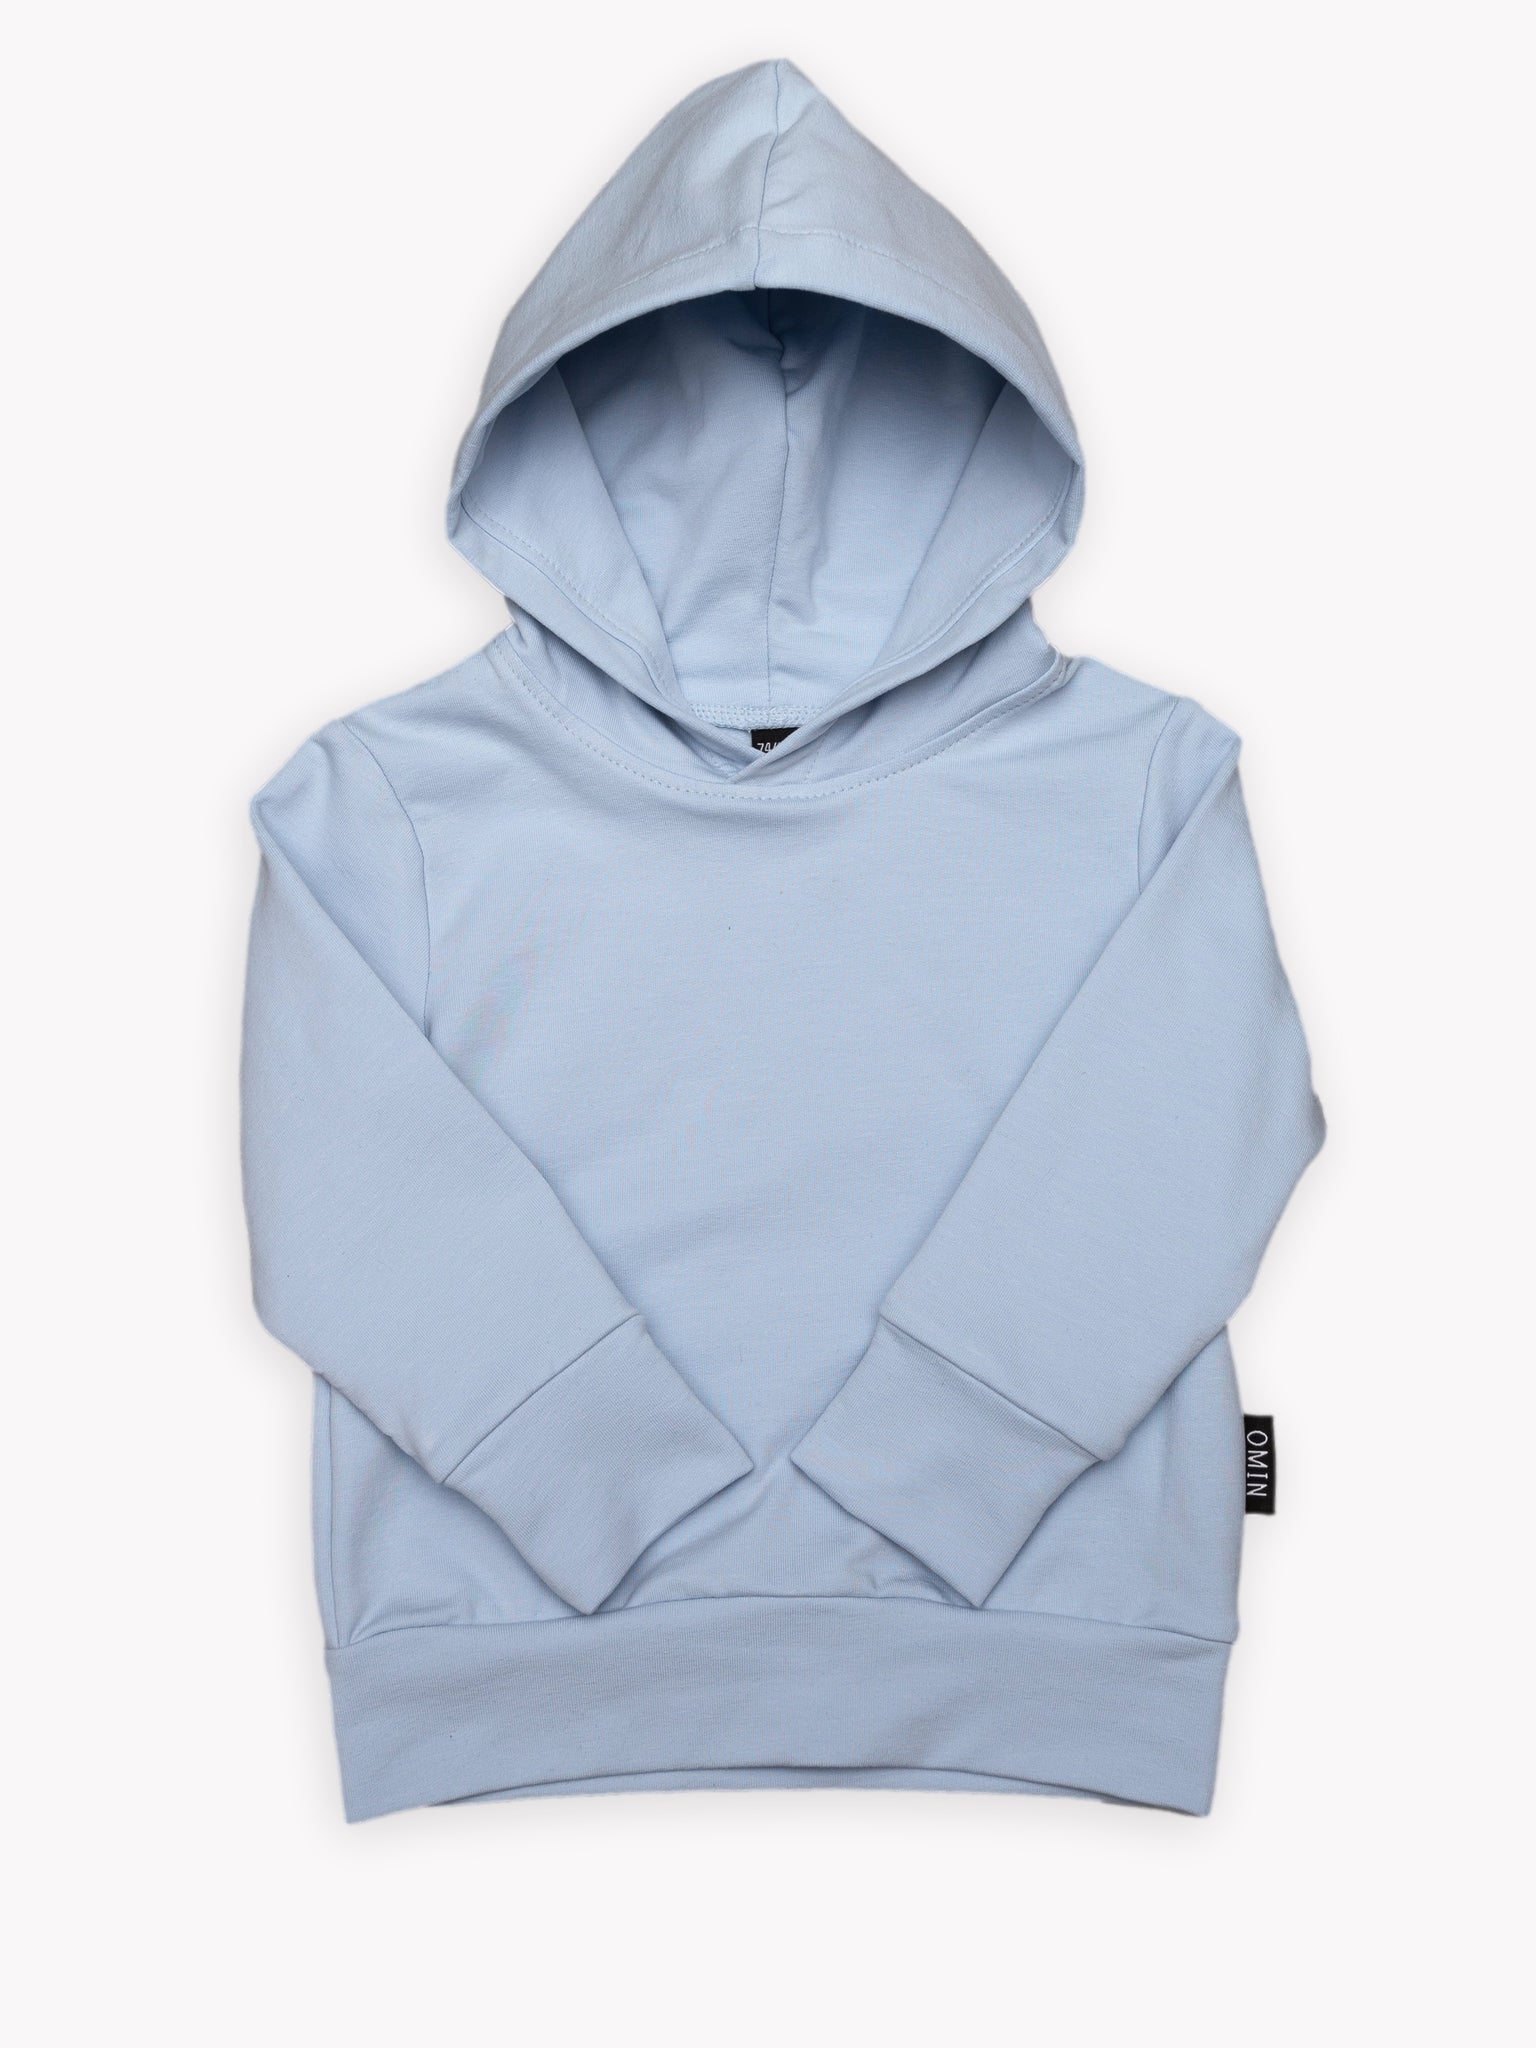 HUPPARI, ice blue [OUTLET]